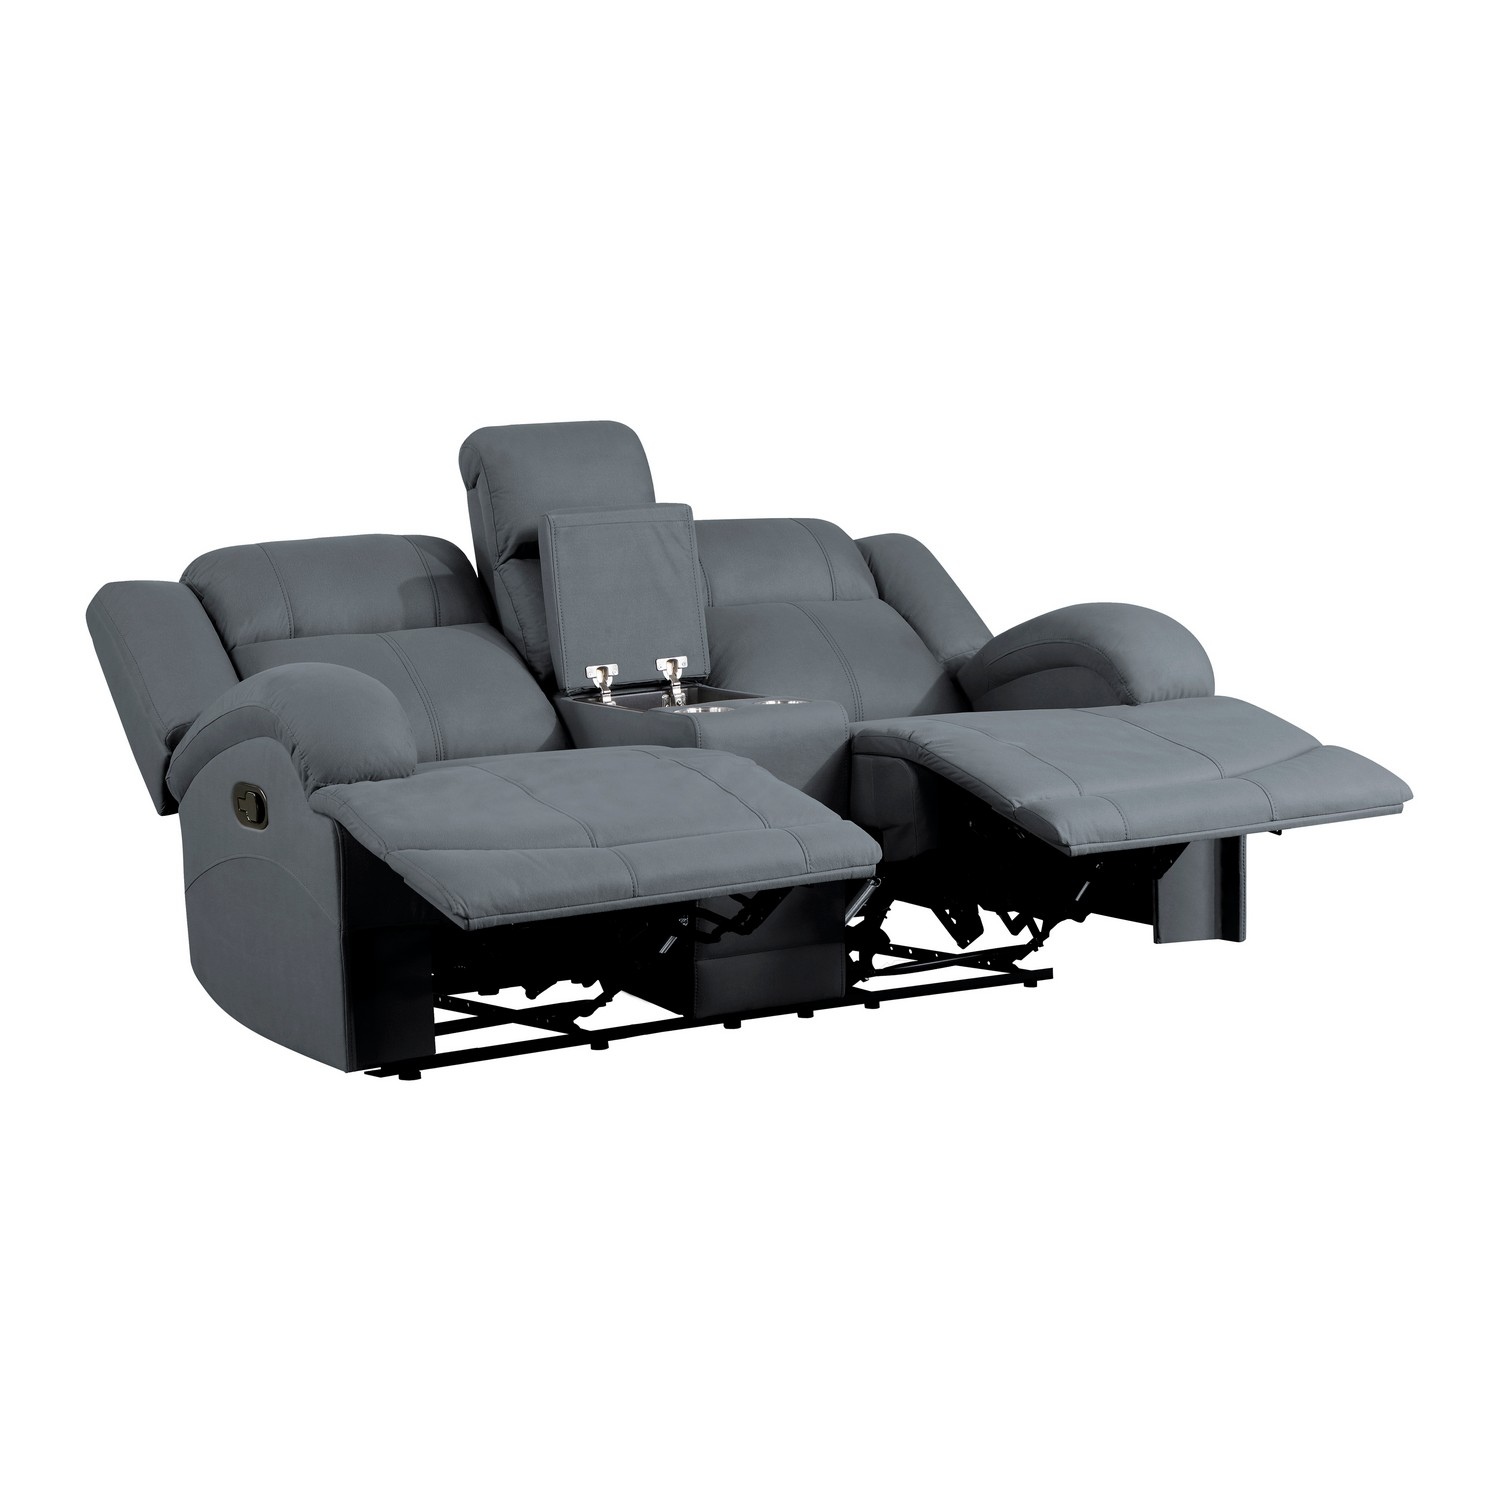 Homelegance Camryn Double Reclining Love Seat - Graphite blue